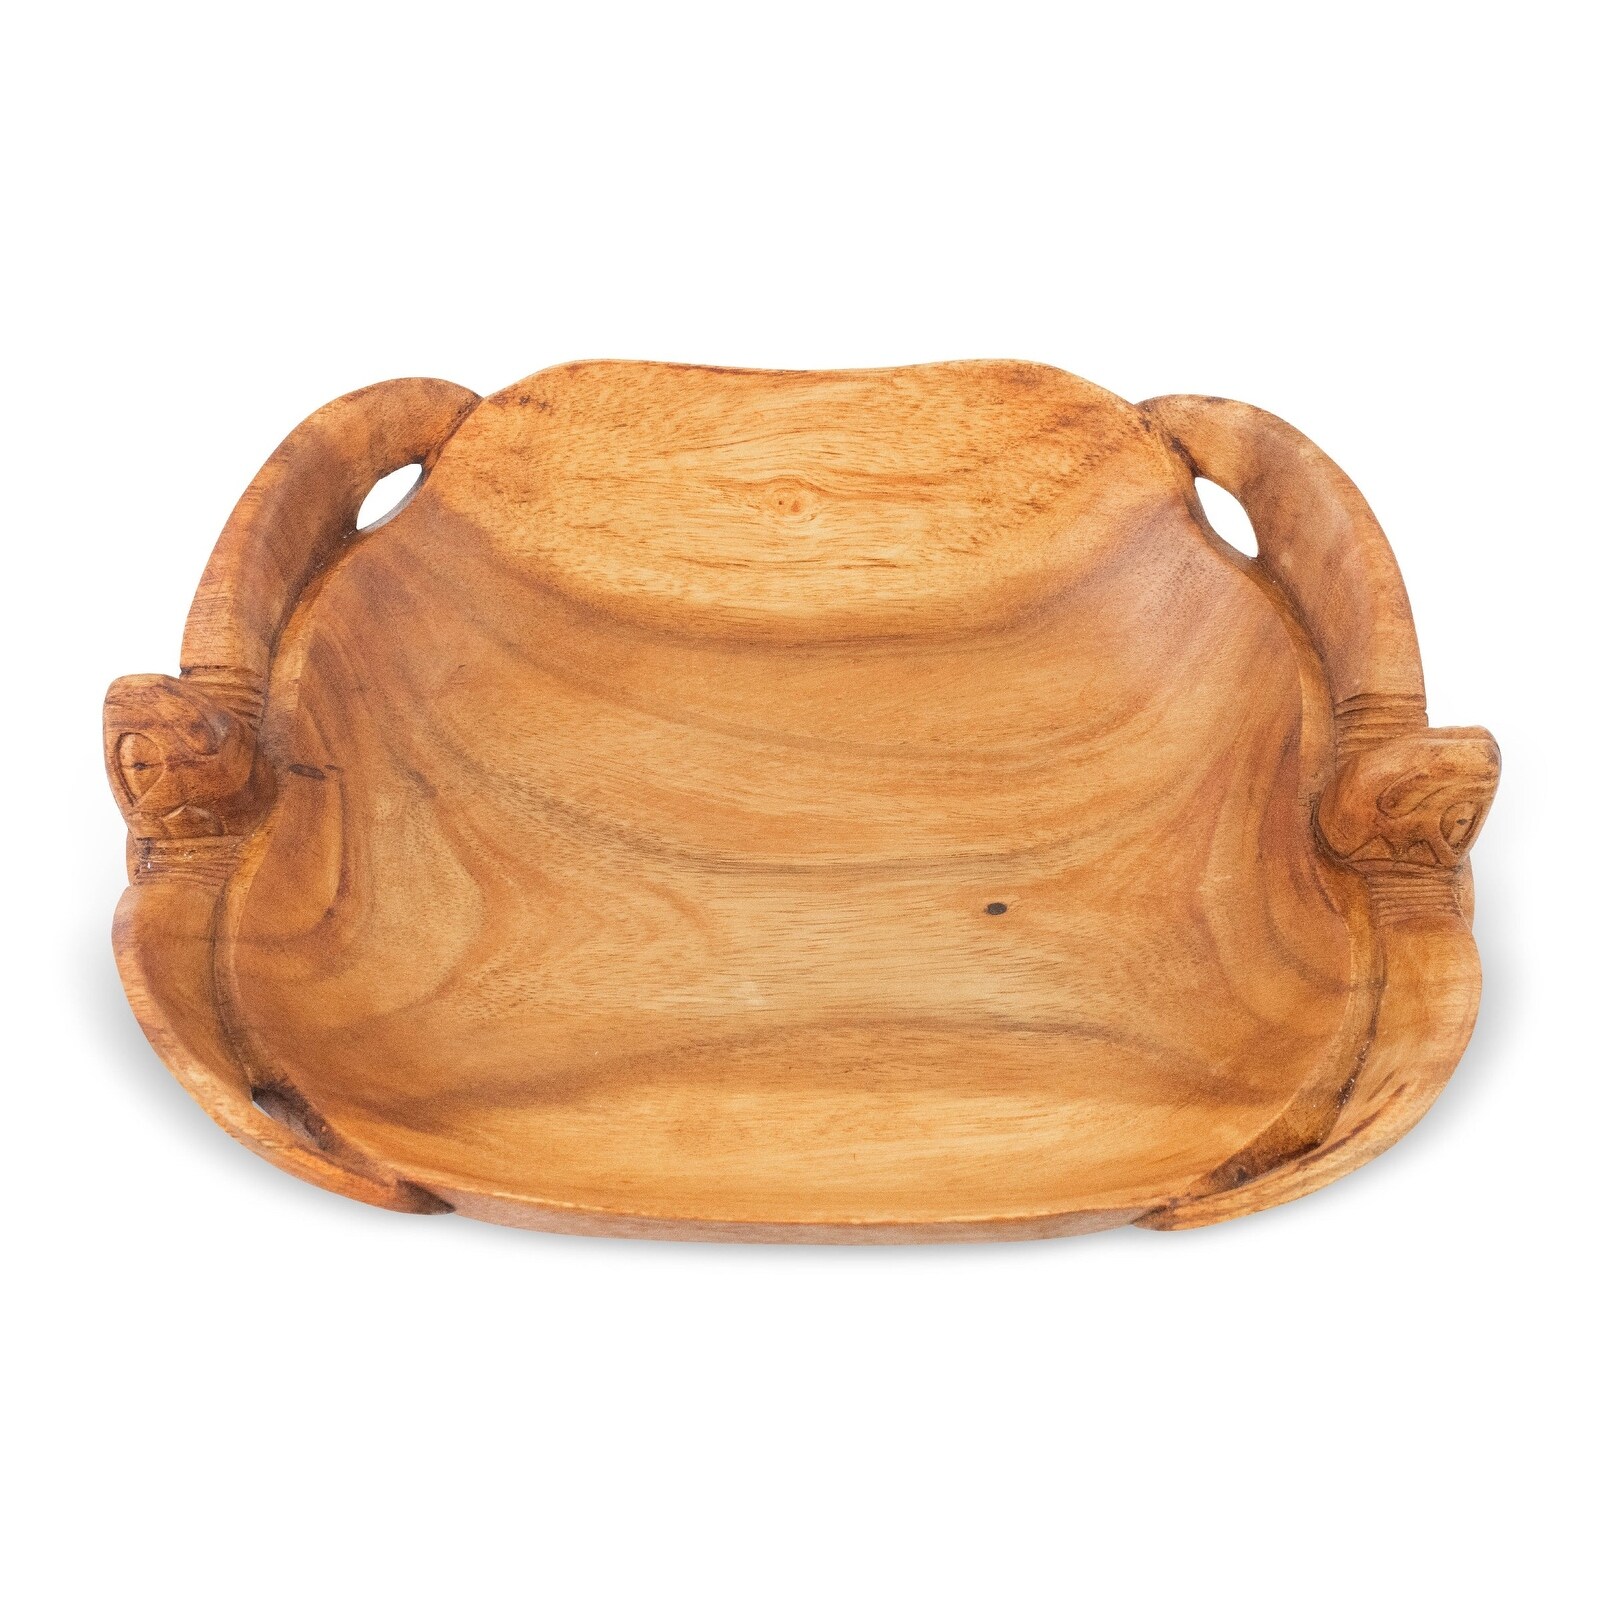 Wooden Handmade Two Turtles Fruit Decorative Bowl Serving Centerpiece Hand Carved Home Decor Decoration Handcrafted Storage Wood - 8" Long x 6" Deep x 2.5" Tall